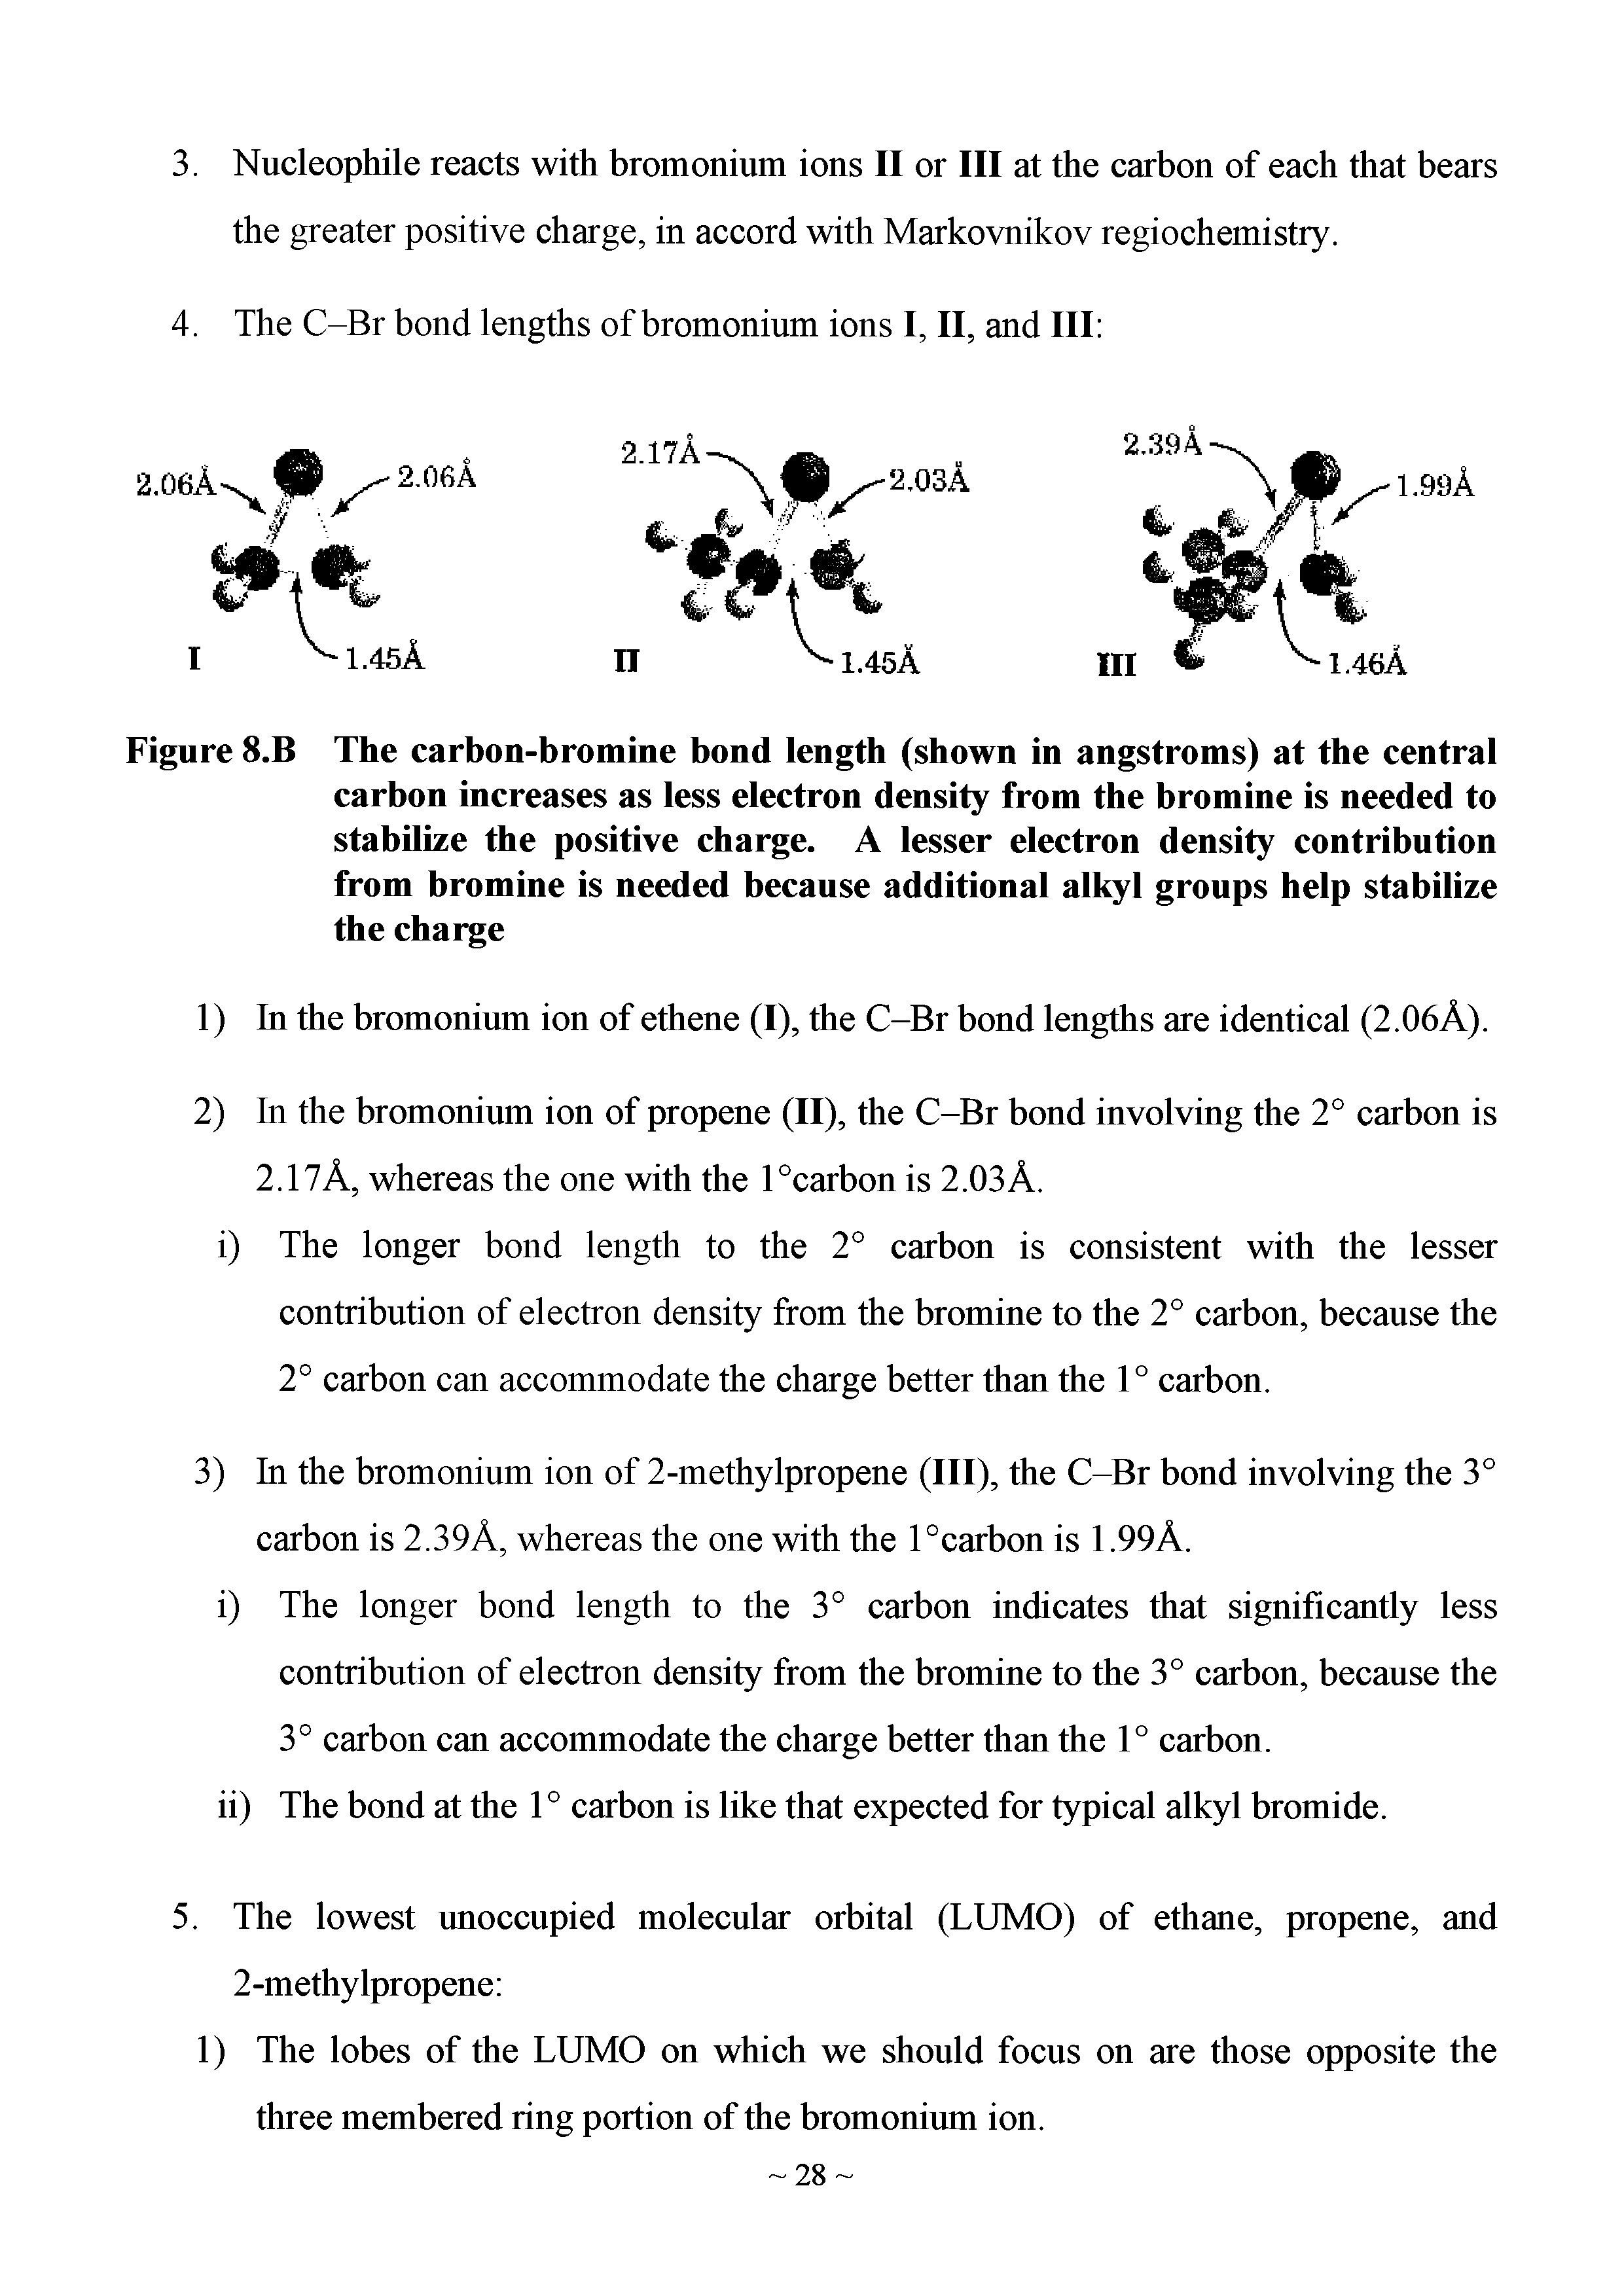 Figure 8.B The carbon-bromine bond length (shown in angstroms) at the central carbon increases as less electron density from the bromine is needed to stabilize the positive charge. A lesser electron density contribution from bromine is needed because additional alkyl groups help stabilize the charge...